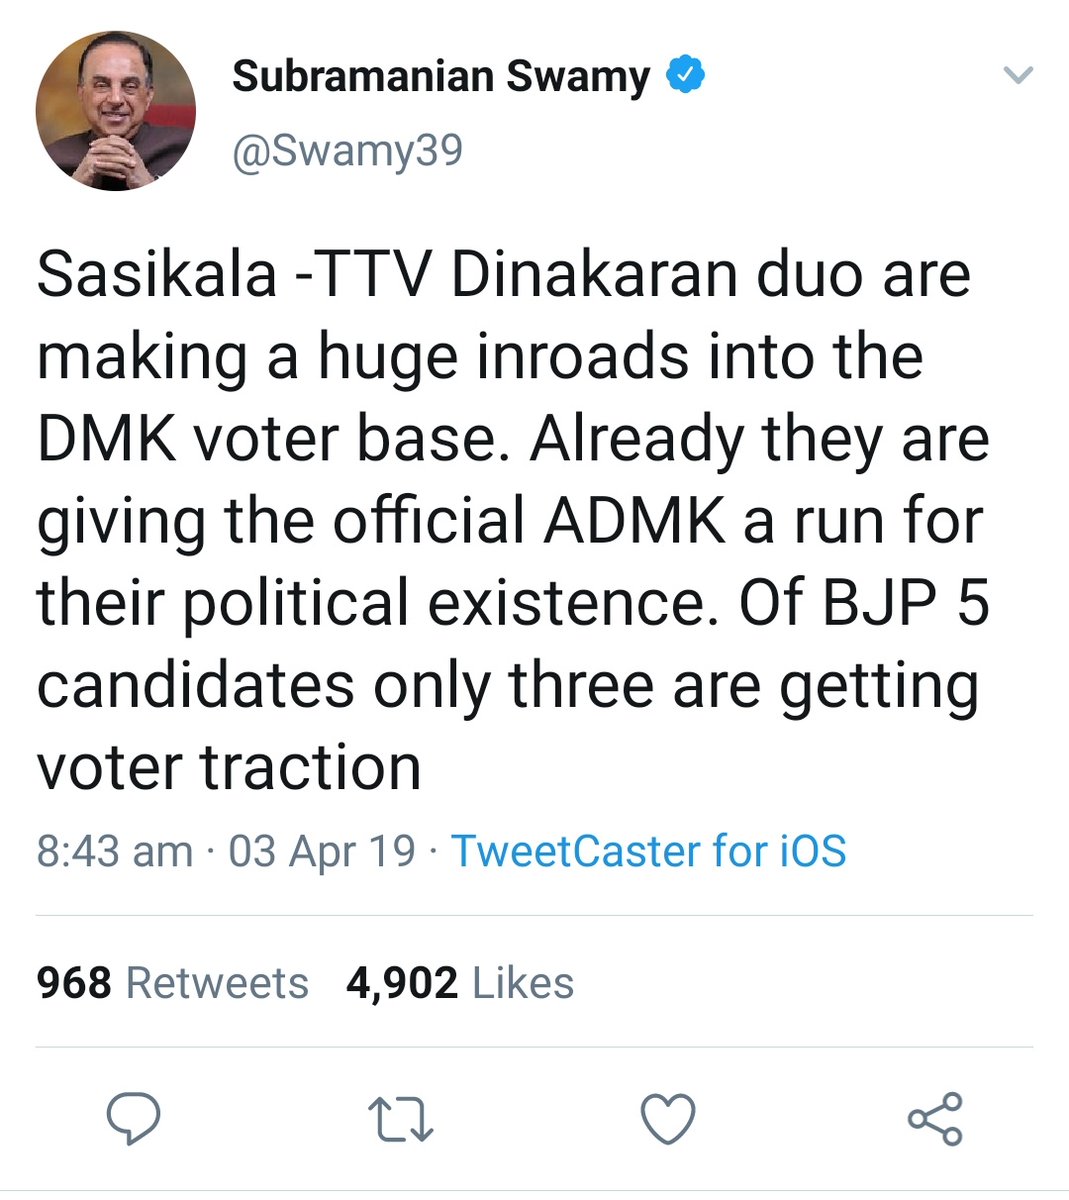 After Jayalalitha's death Swamy has been campaigning for Sasikala and he wants Sasikala to be the head of AIADMK.But you said in 2010 that Sasikala is Sonia's agent, didn't you So can we conclude that you want Sonia to get control of Tamil Nadu politics 